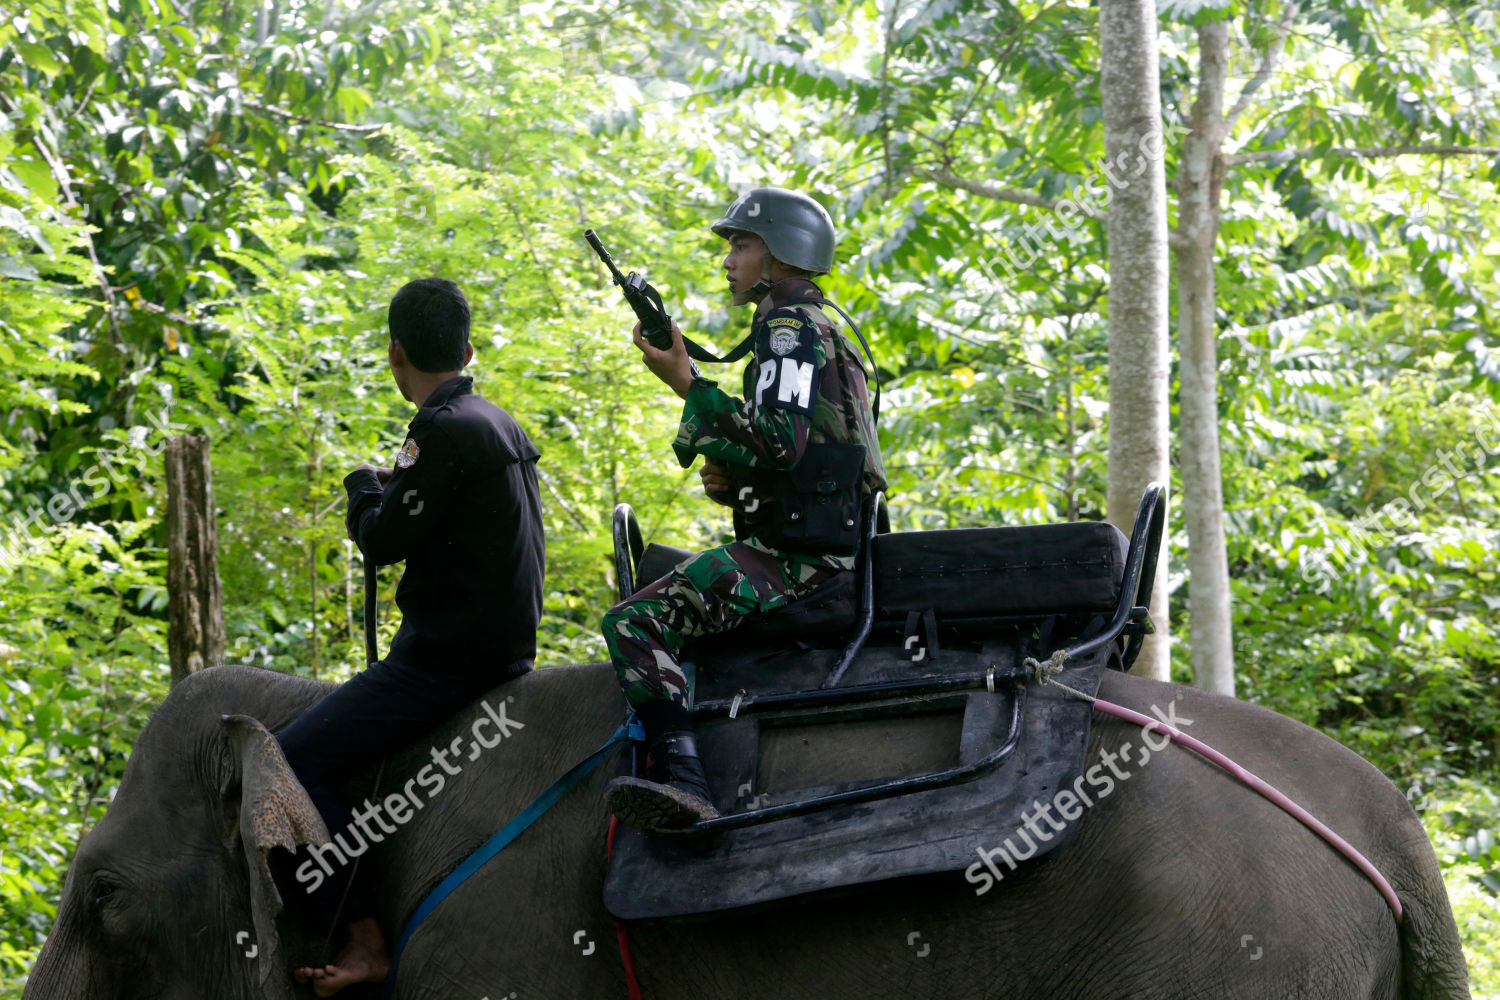 indonesian-military-police-unit-on-a-joint-patrol-with-elephants-at-cru-sampoinet-indonesia-shutterstock-editorial-10219956j.jpg